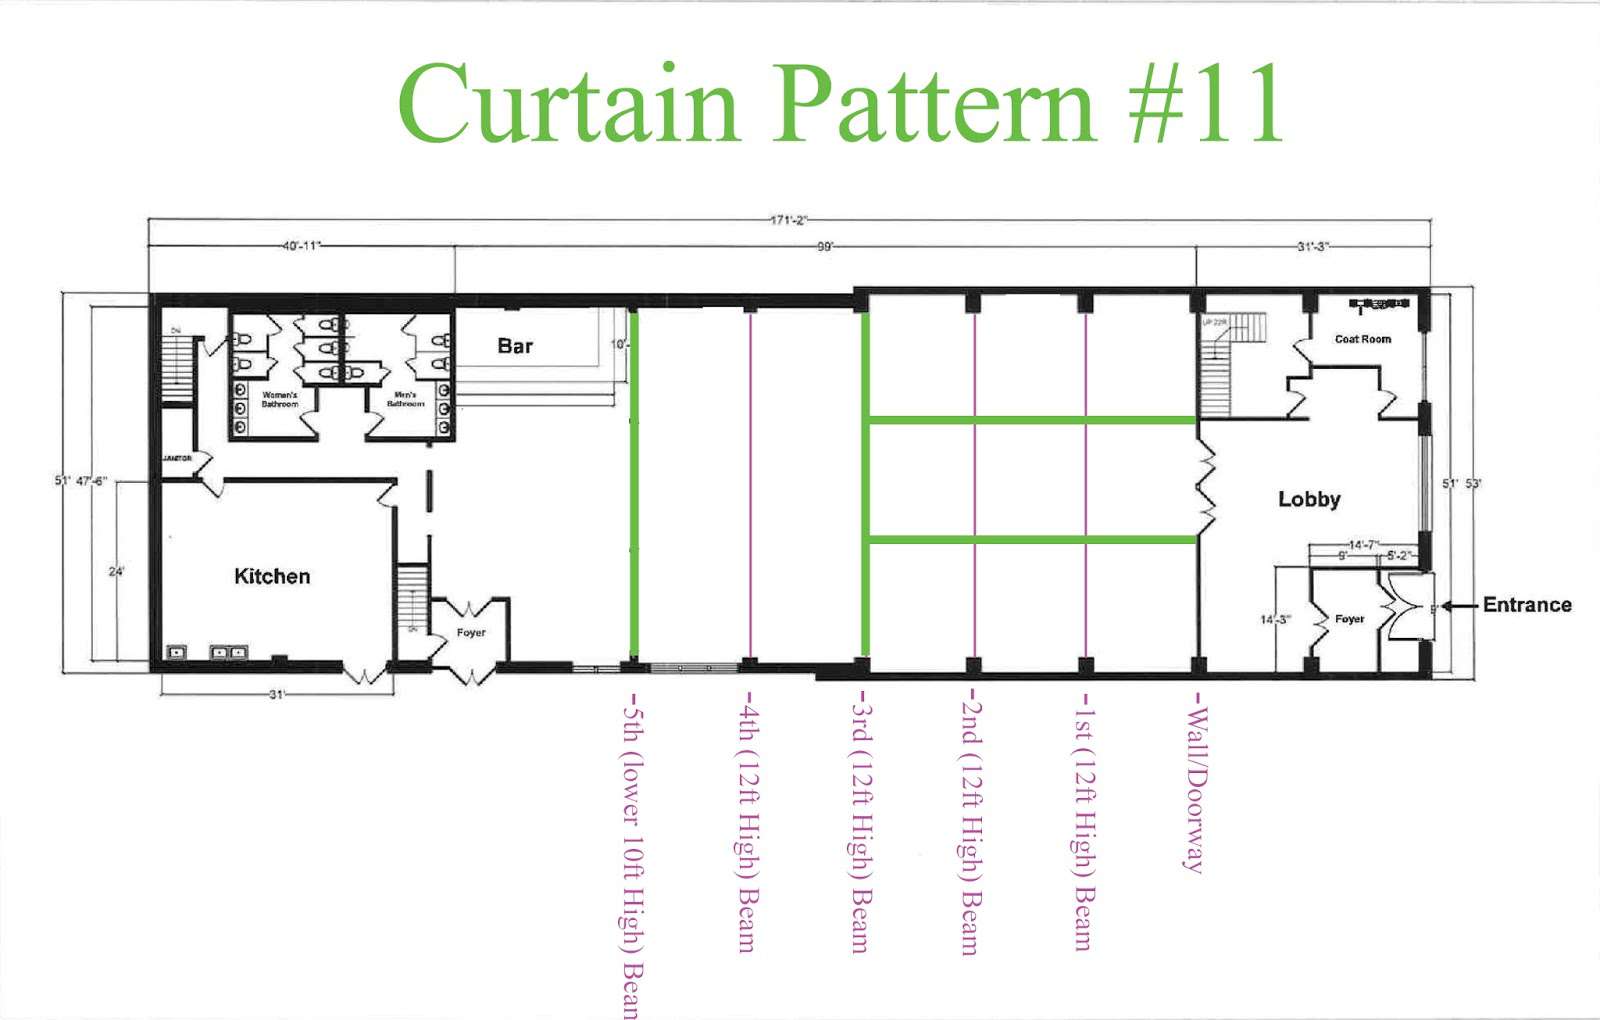 Curtains hanging across the width of the Main Room at 26 Bridge under the 3rd Beam and 5th Beam. Also hanging the length of the room between 3rd Bean and Entrance wall on the Bar-Side of The Main Room and NON-Bar-Side of The Main Room.